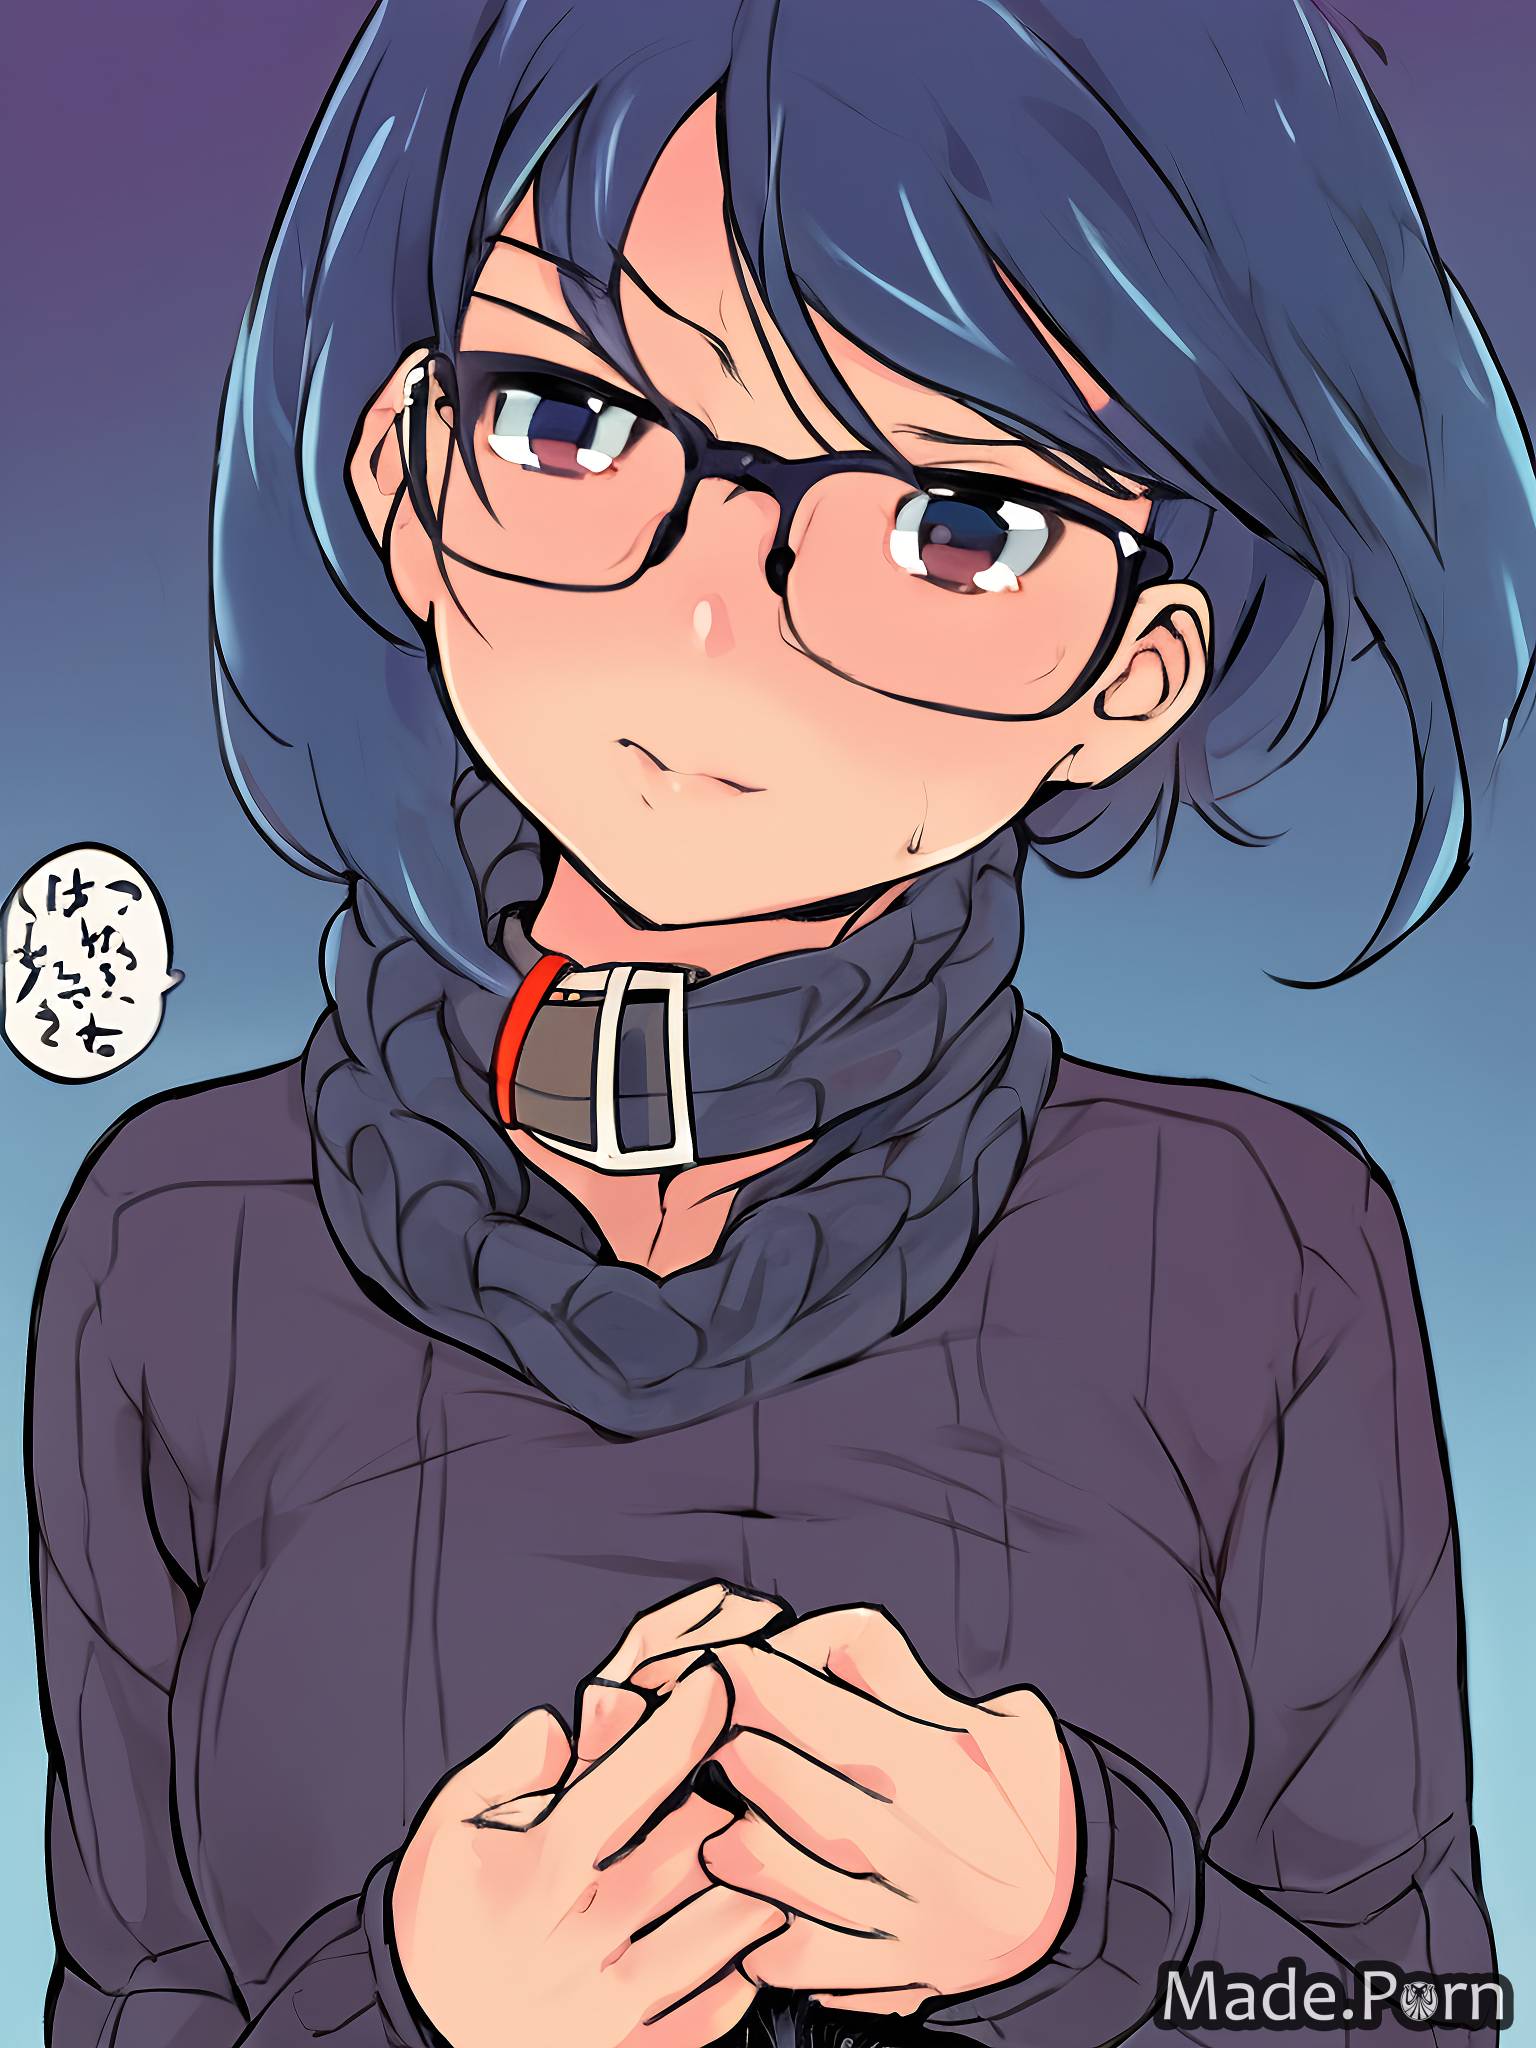 Sweater Anime Porn - Porn image of glasses collar 18 knitted sweater asian blue hair Anime  created by AI